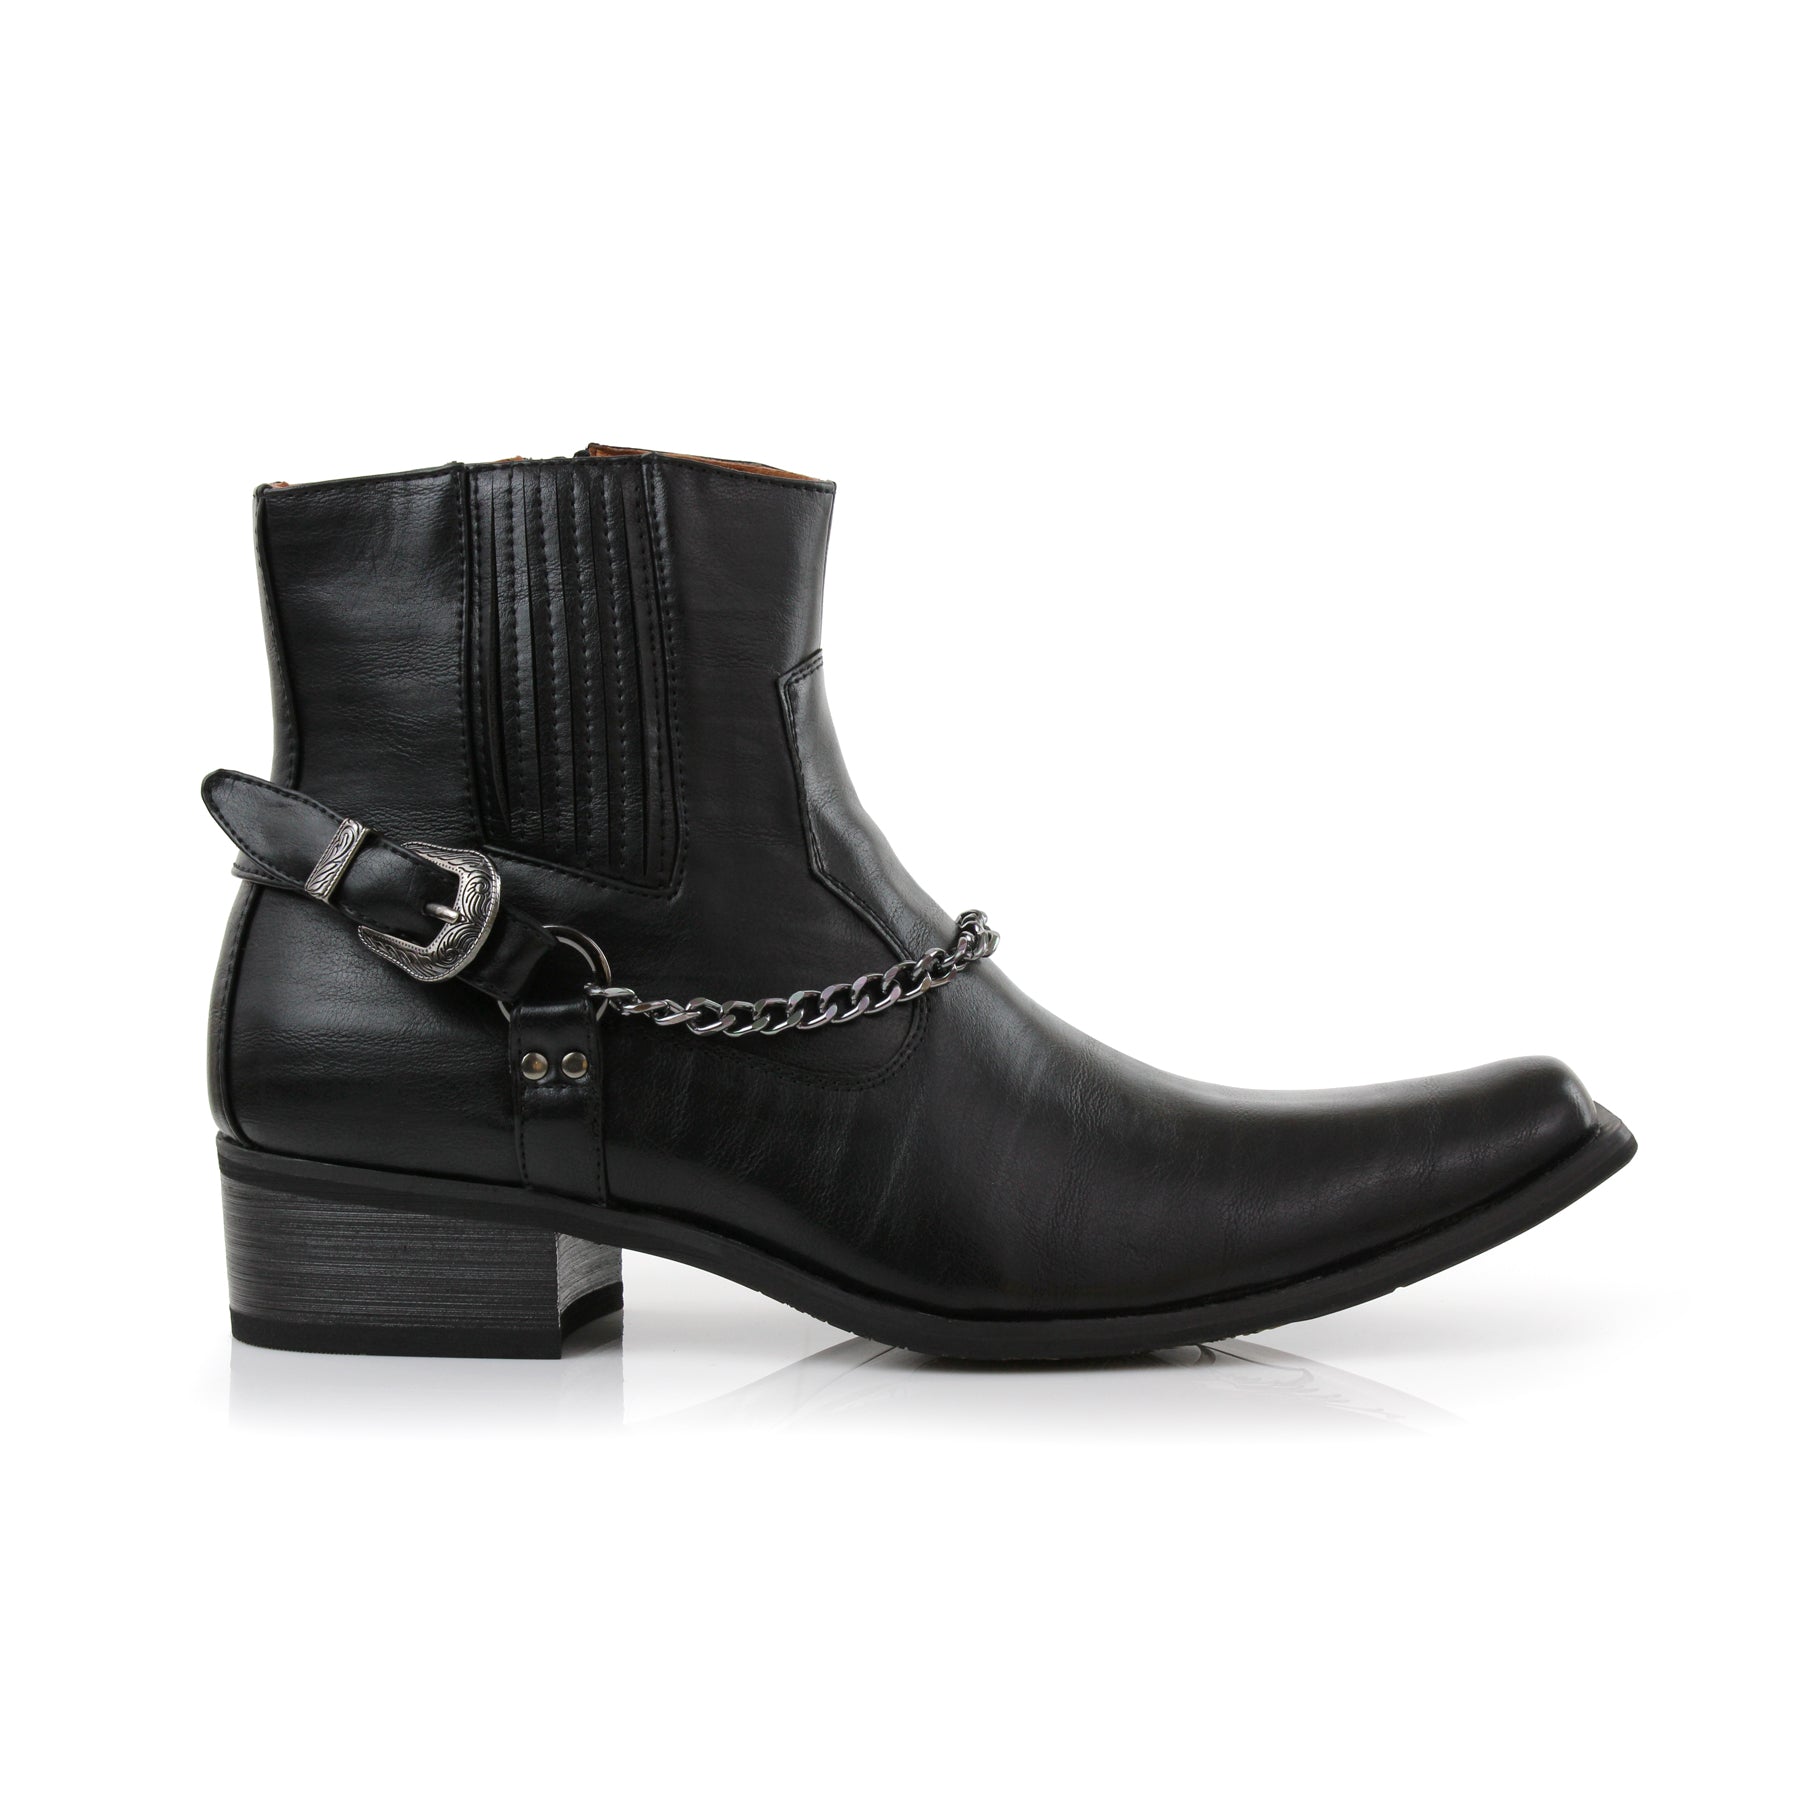 Faux Leather Cowboy Boots | Reyes by Ferro Aldo | Conal Footwear | Outer Side Angle View